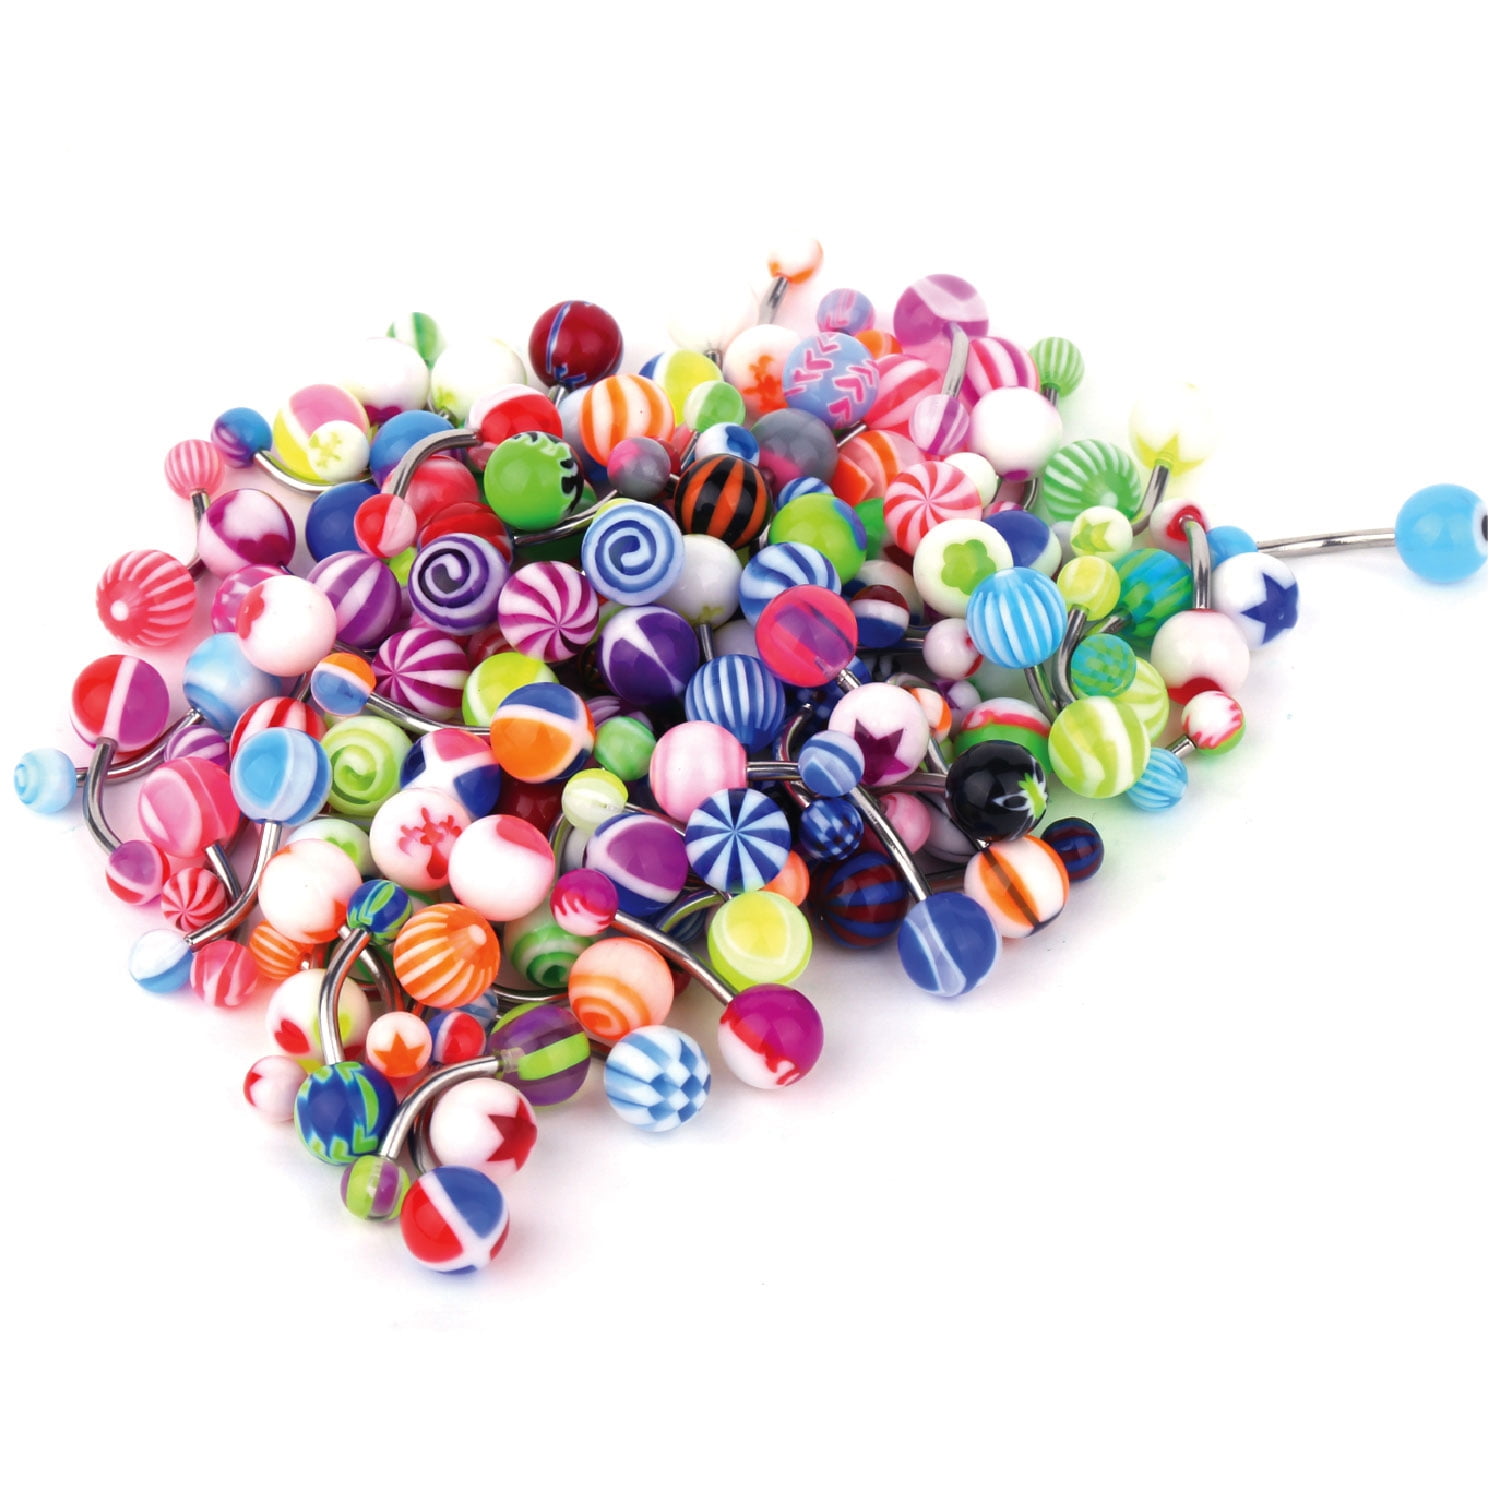 100 MIx Assorted Ball Belly Navel Barbell Bars Rings Body Piercing CT I6N8 L6C1 